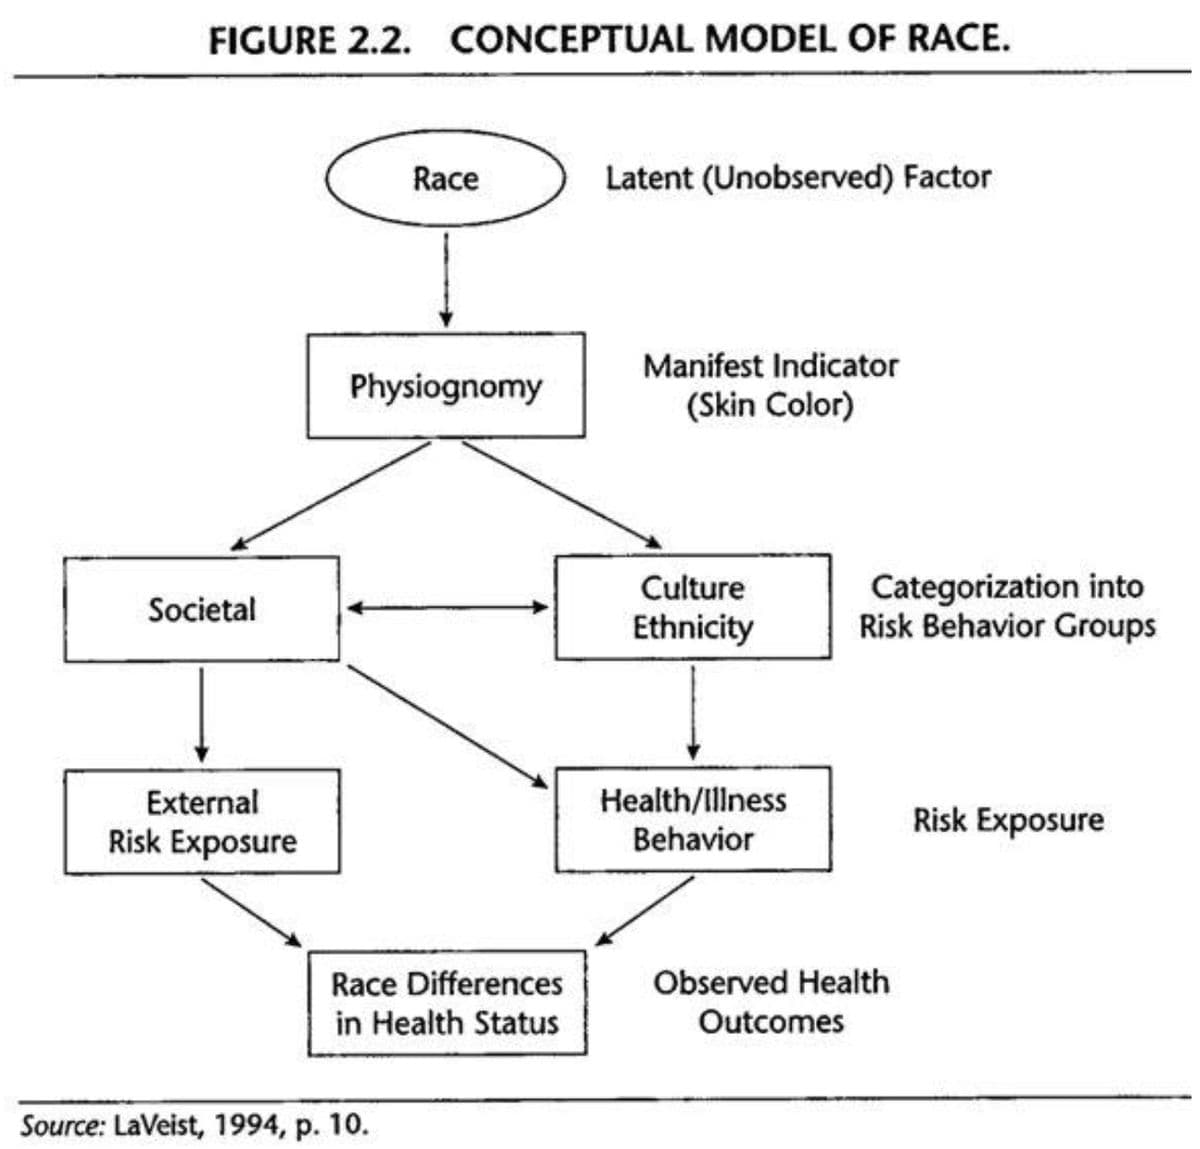 FIGURE 2.2. CONCEPTUAL MODEL OF RACE.
Societal
External
Risk Exposure
Race
Physiognomy
Race Differences
in Health Status
Source: LaVeist, 1994, p. 10.
Latent (Unobserved) Factor
Manifest Indicator
(Skin Color)
Culture
Ethnicity
Health/Illness
Behavior
Categorization into
Risk Behavior Groups
Observed Health
Outcomes
Risk Exposure